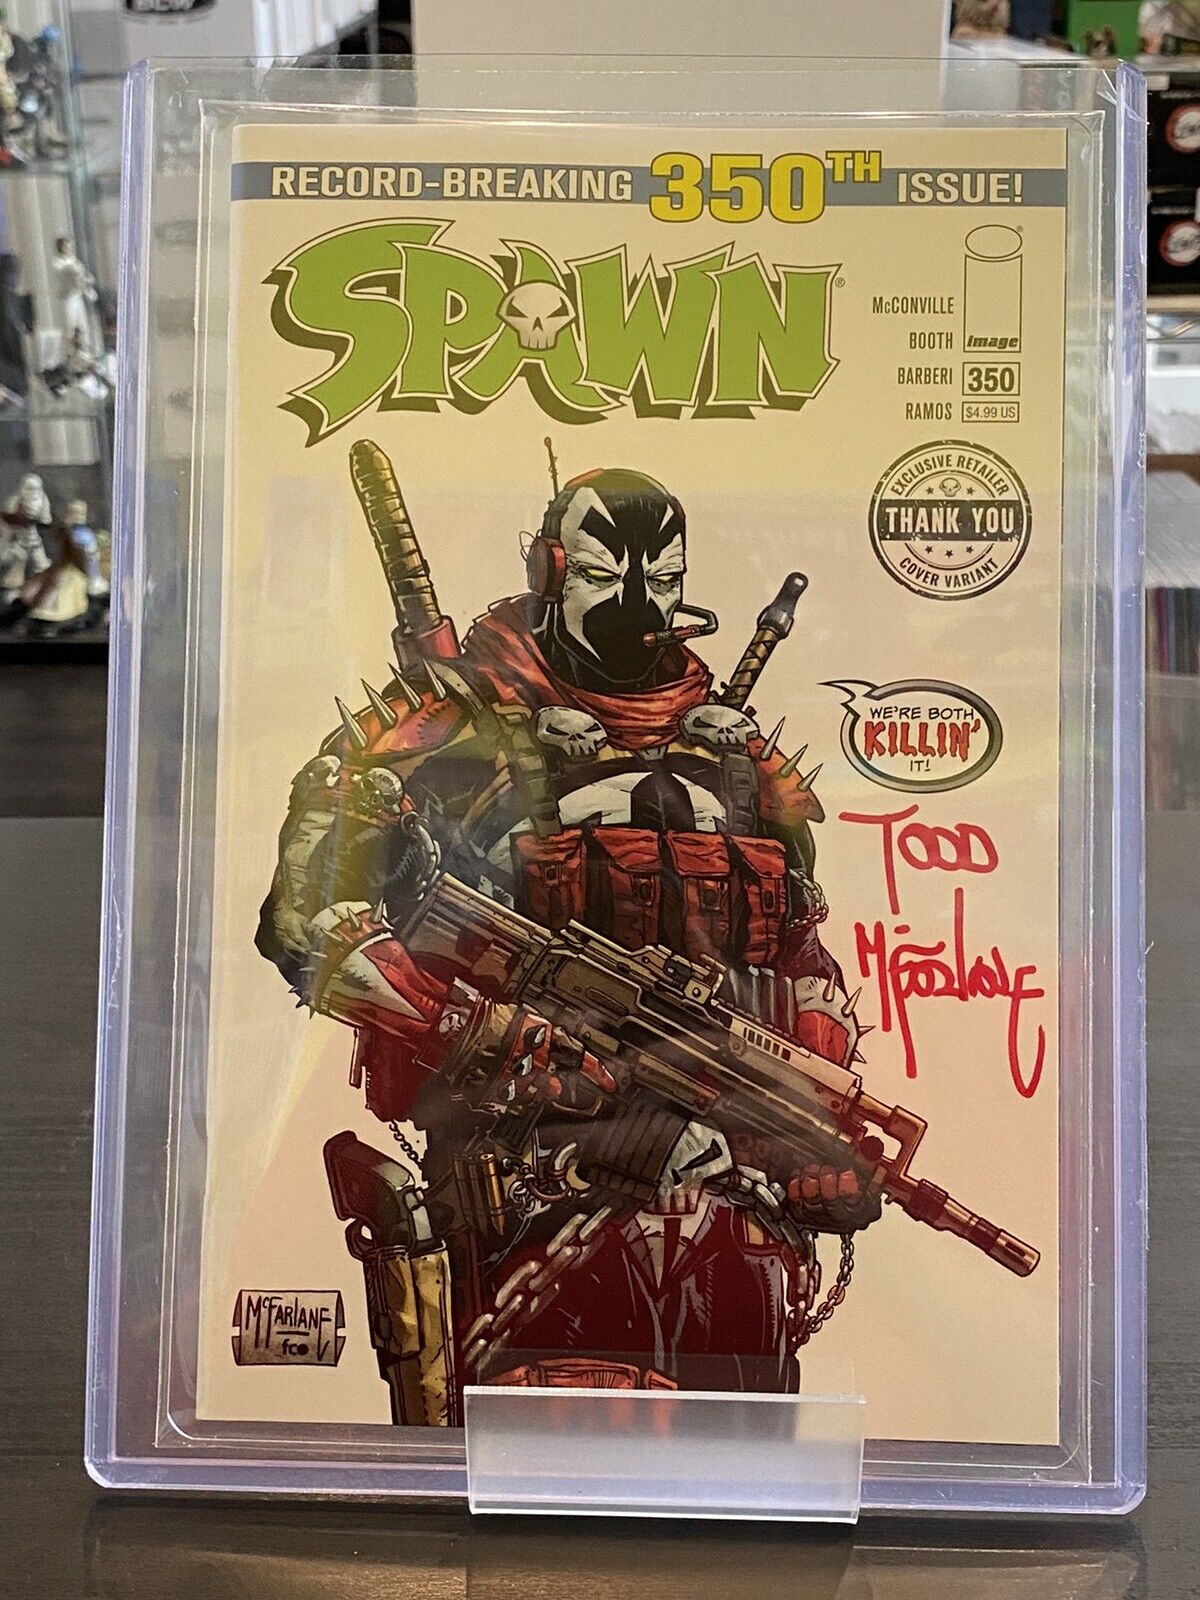 SPAWN #350 EXCLUSIVE RETAILER THANK YOU SIGNED TODD MCFARLANE COMIC BOOK 1:STORE